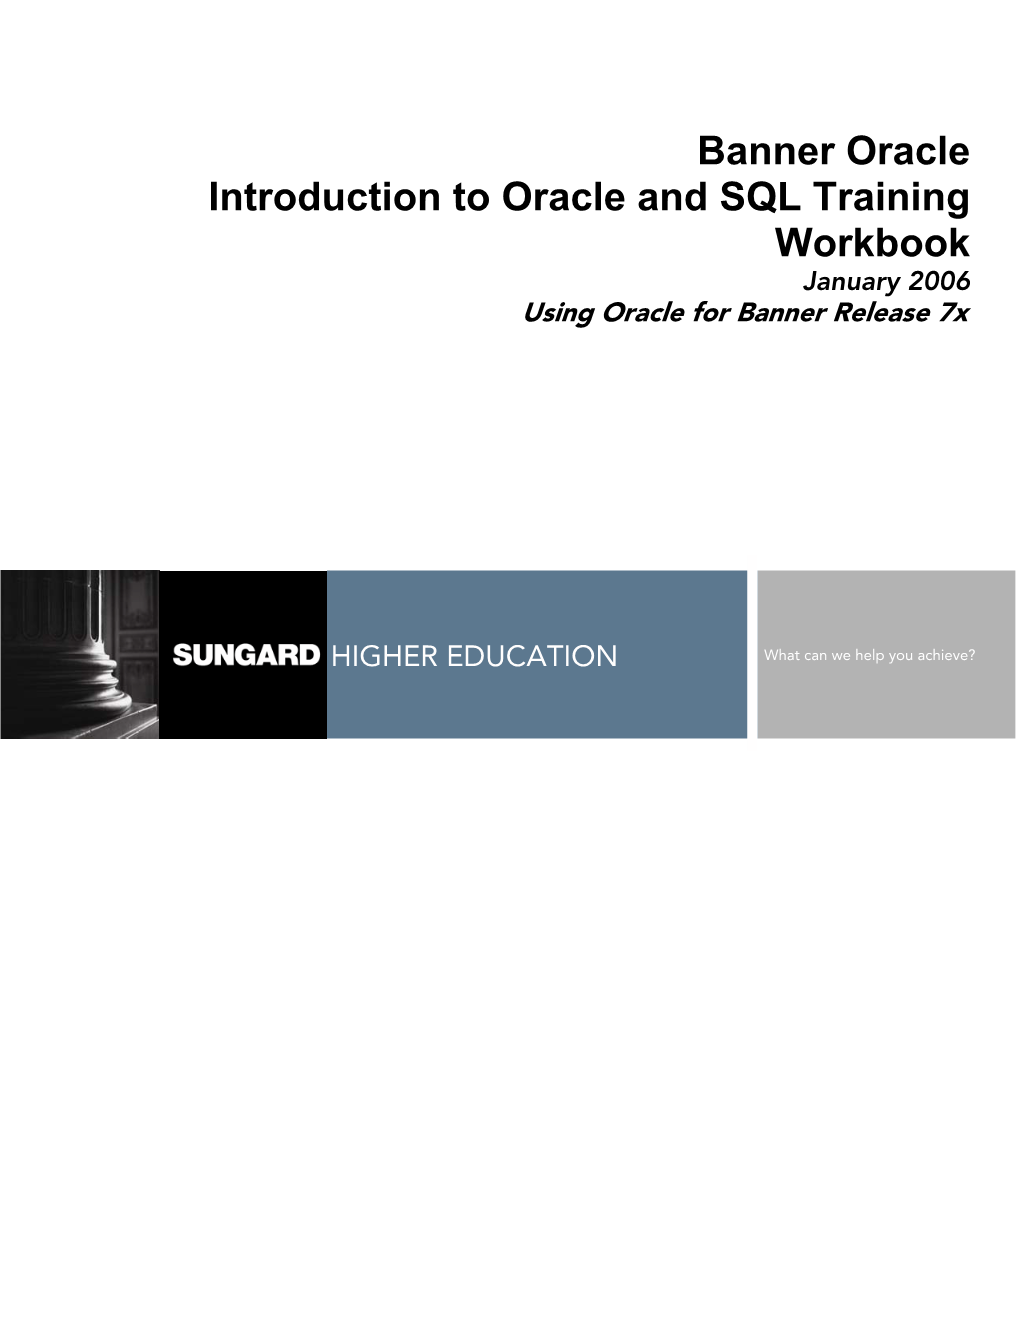 Banner Oracle Introduction to Oracle and SQL Training Workbook January 2006 Using Oracle for Banner Release 7X